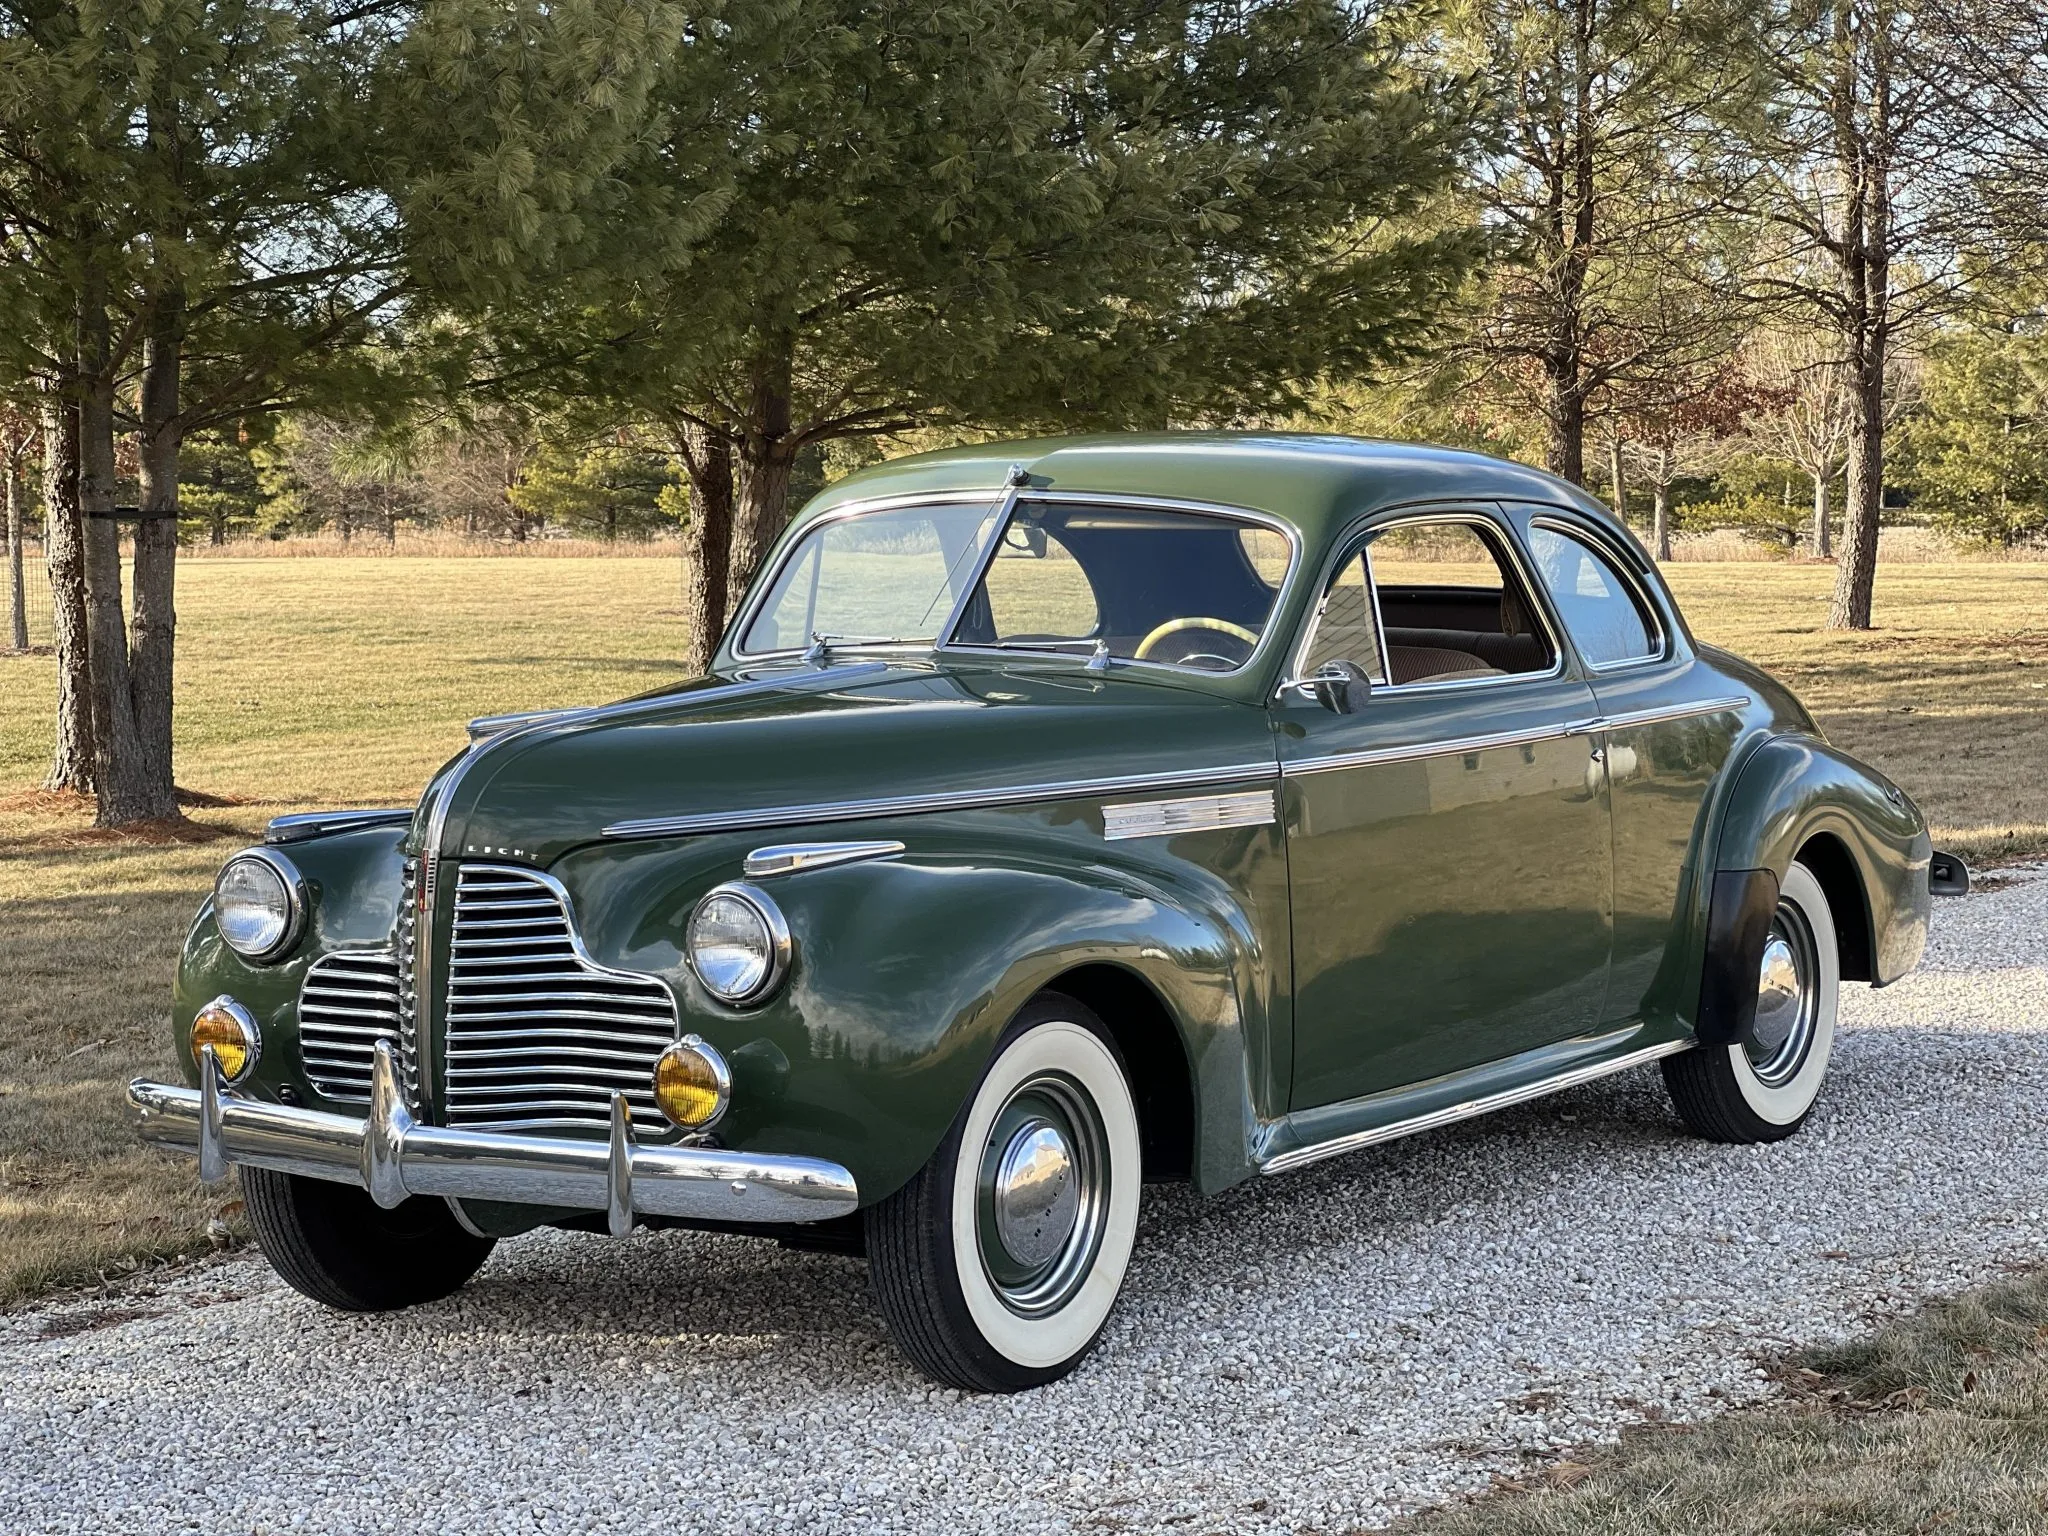 1940 Buick Series 50 Super Sport Coupe, buick, Buick Series 50